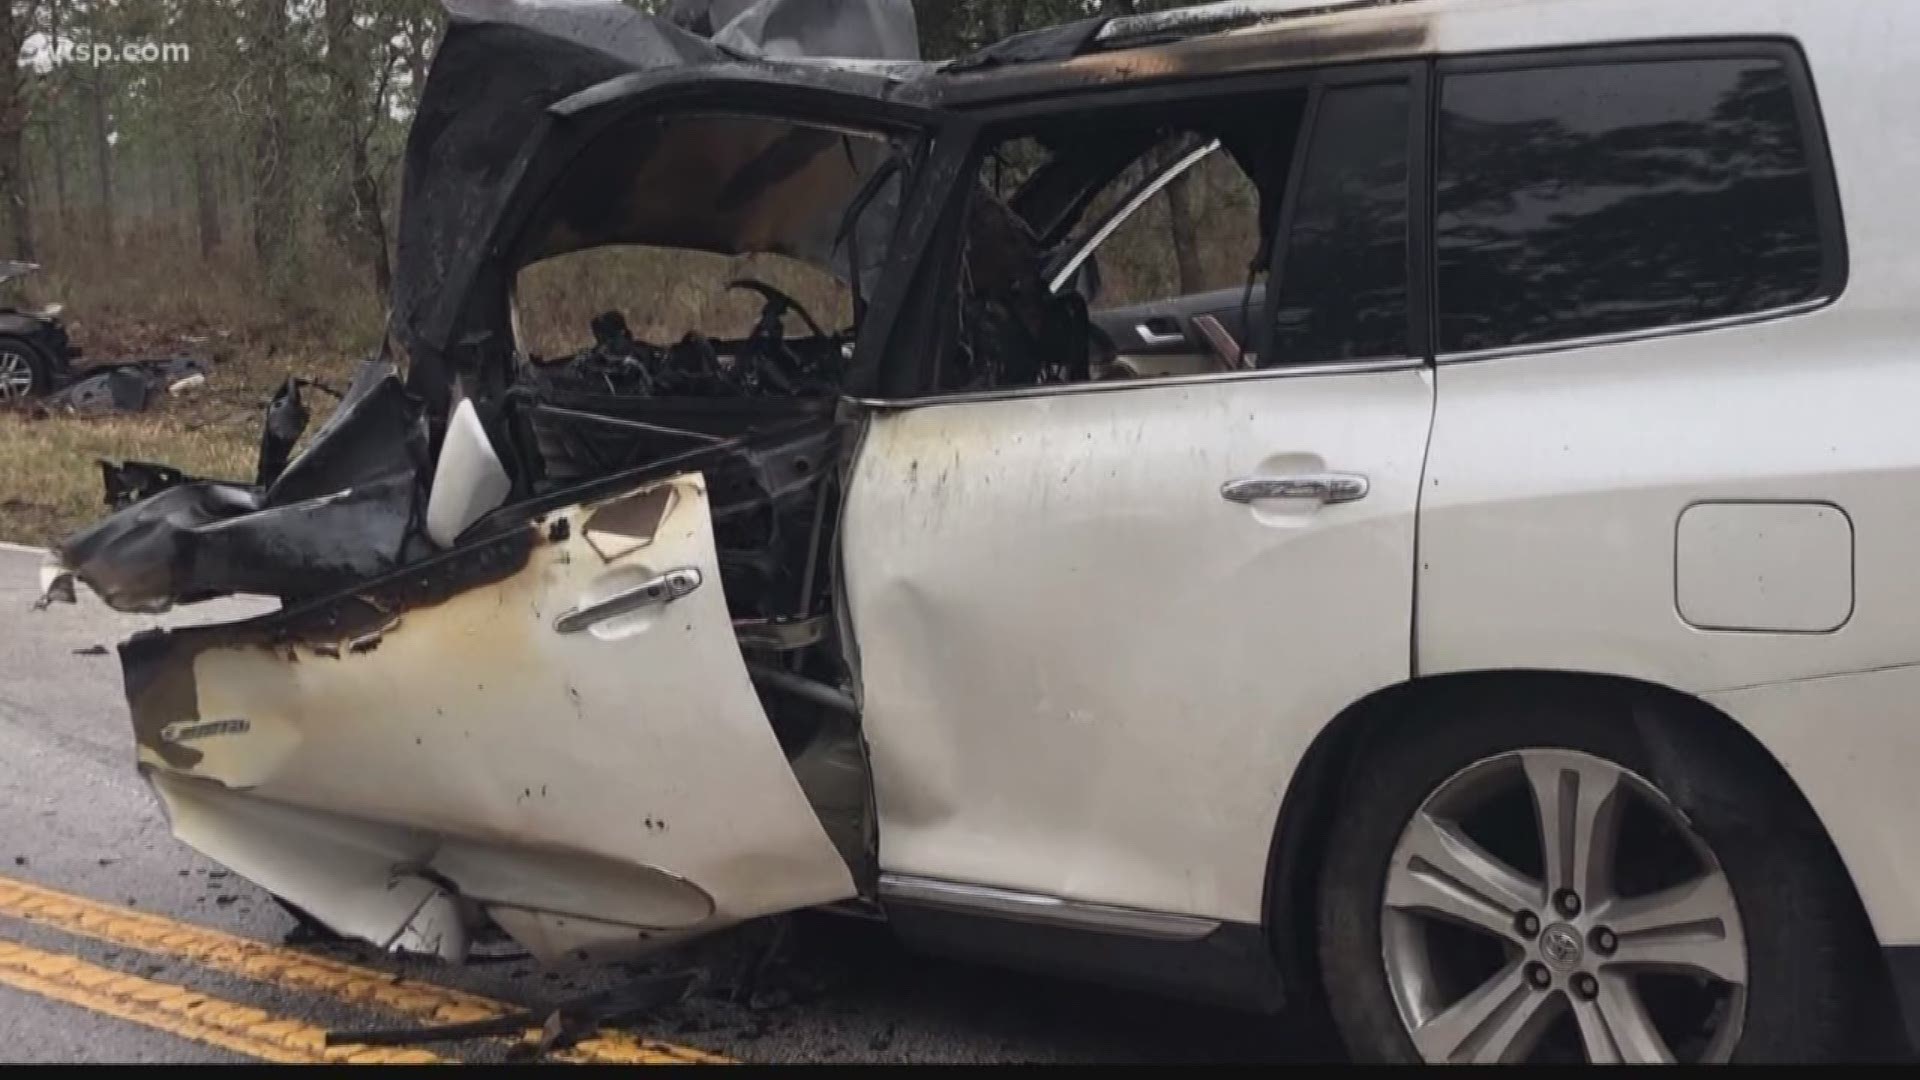 A driver who was trying to pass another car in a no-passing zone left three passengers dead on Christmas Eve, the Florida Highway Patrol says.